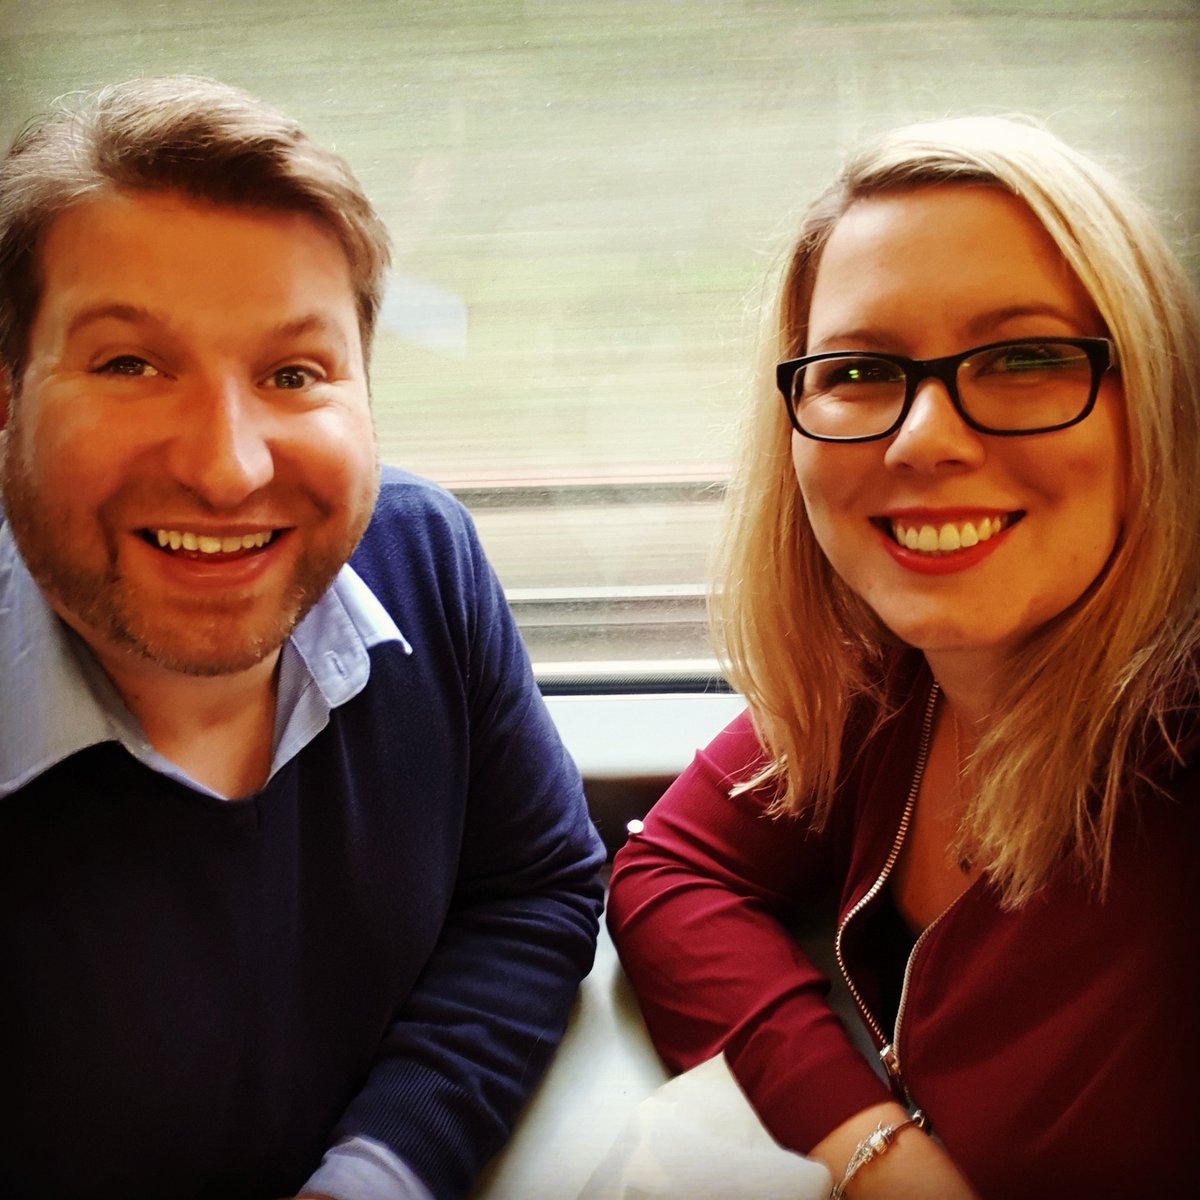 On our way to the Student Leadership Programme Awards. I am honoured to have been nominated for Outstanding Commitment to Student Affairs. It's all about improving #healthcarestudents experiences #studentmidwife #councilofdeans #leadership #healthcare #excited @brightmidwifery